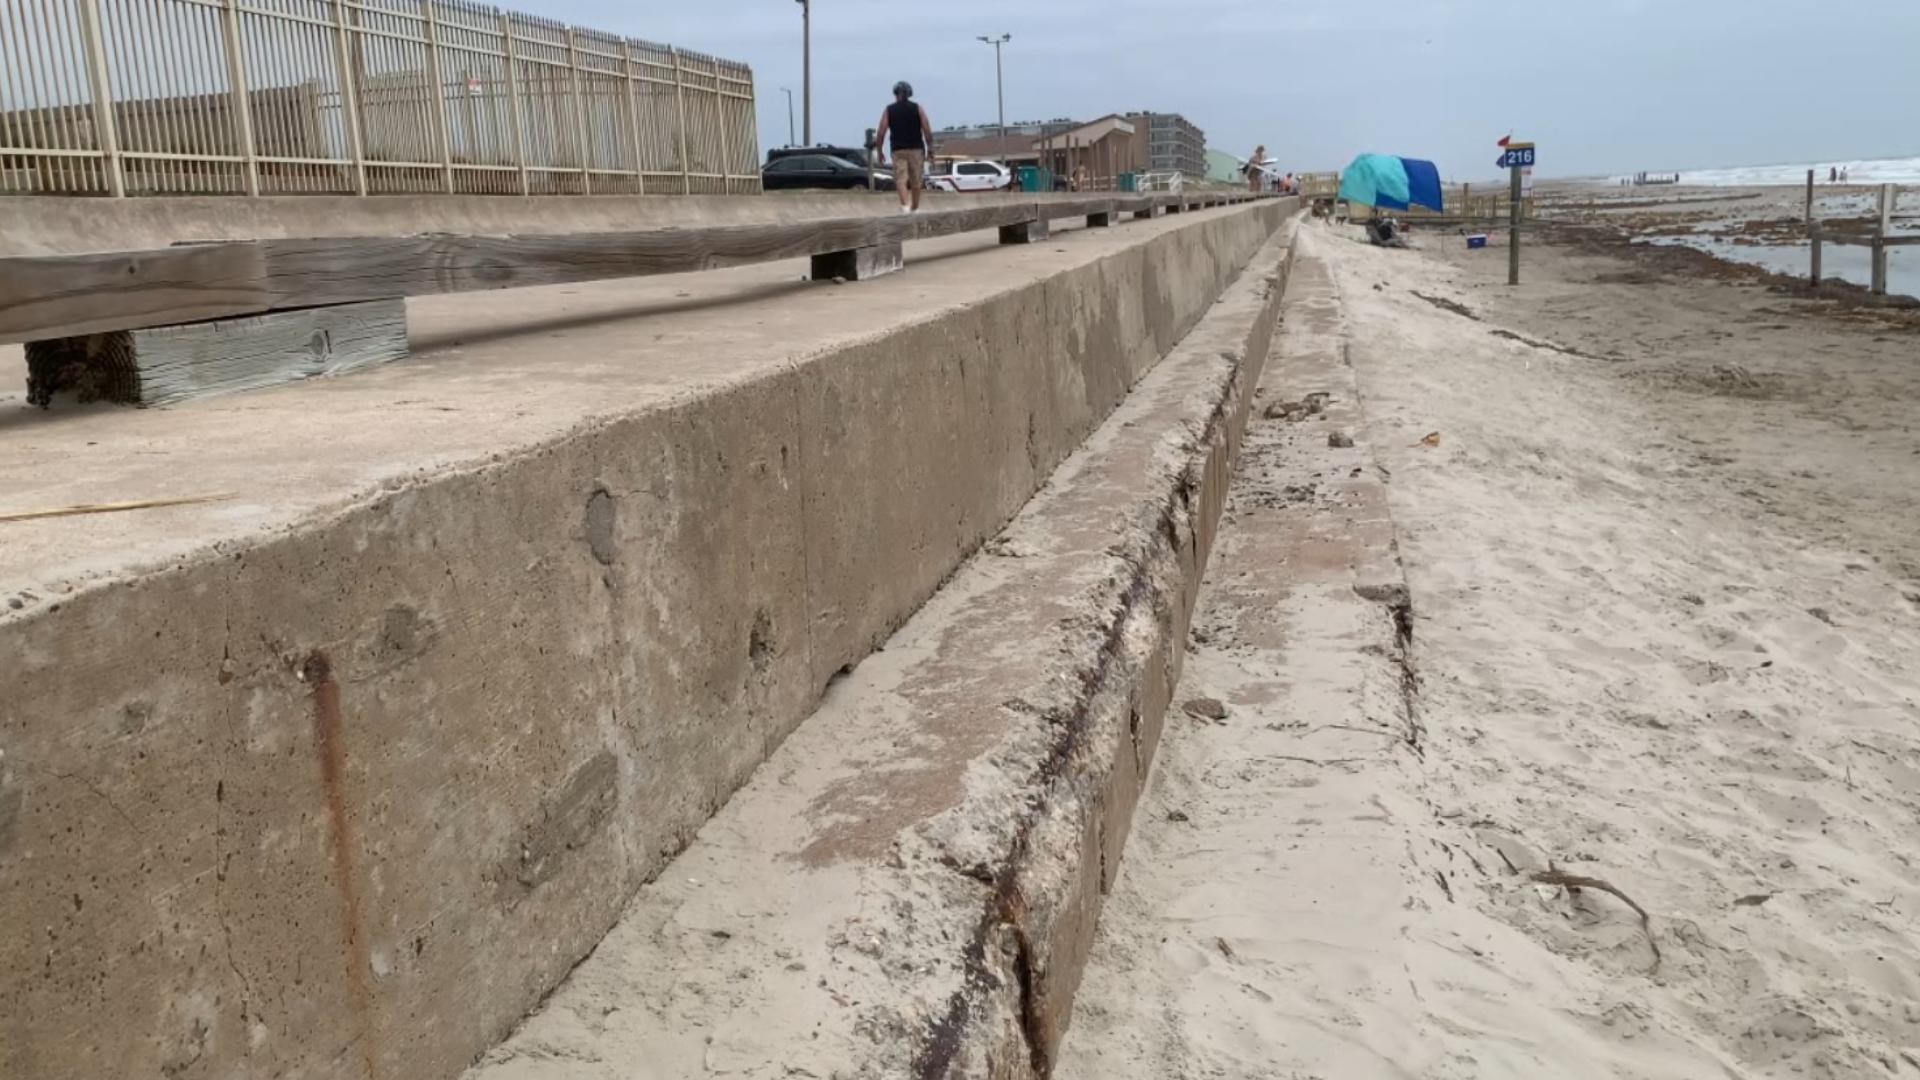 The seawall on the island is in need of millions of dollars worth of renovation work and the city has the money to start if the owners agree to let them.